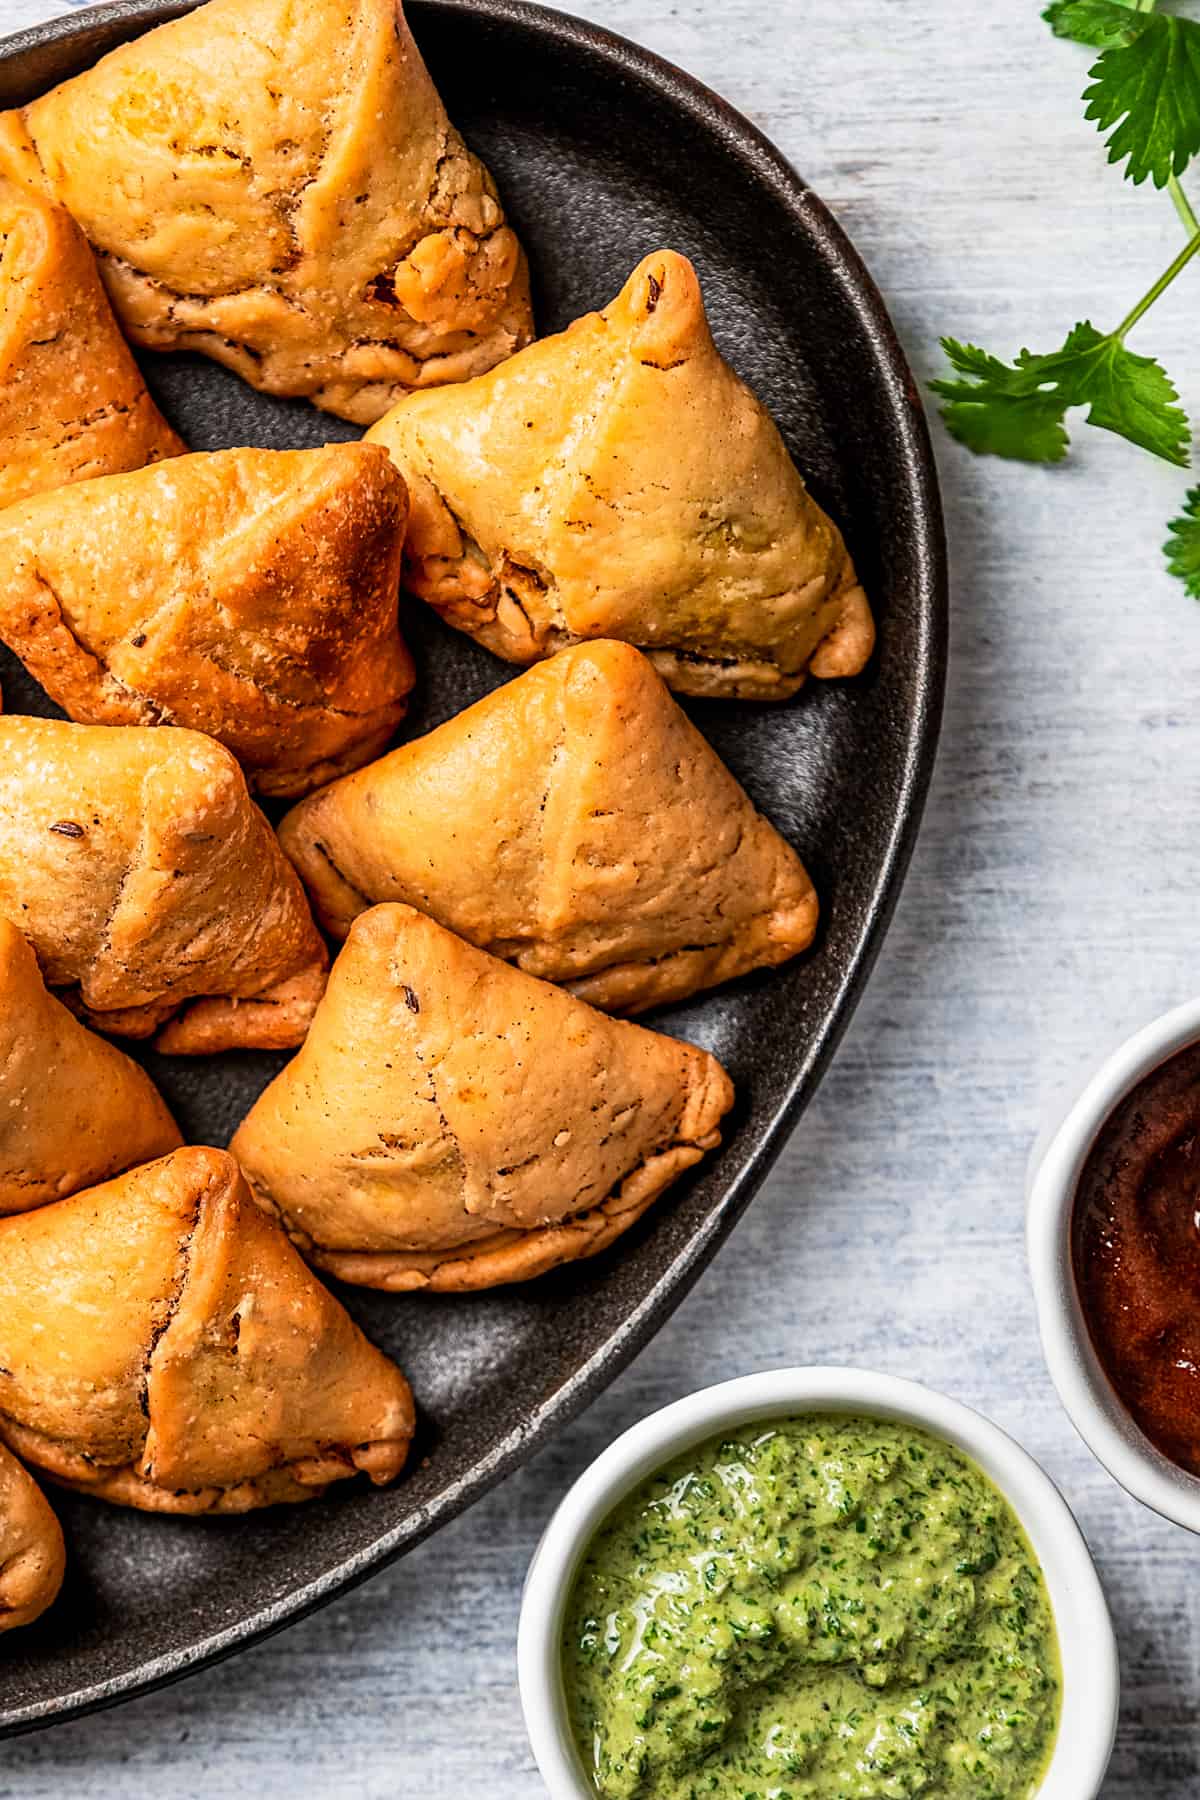 Homemade samosas on a plate, with two small bowls of chutney placed next to the plate.